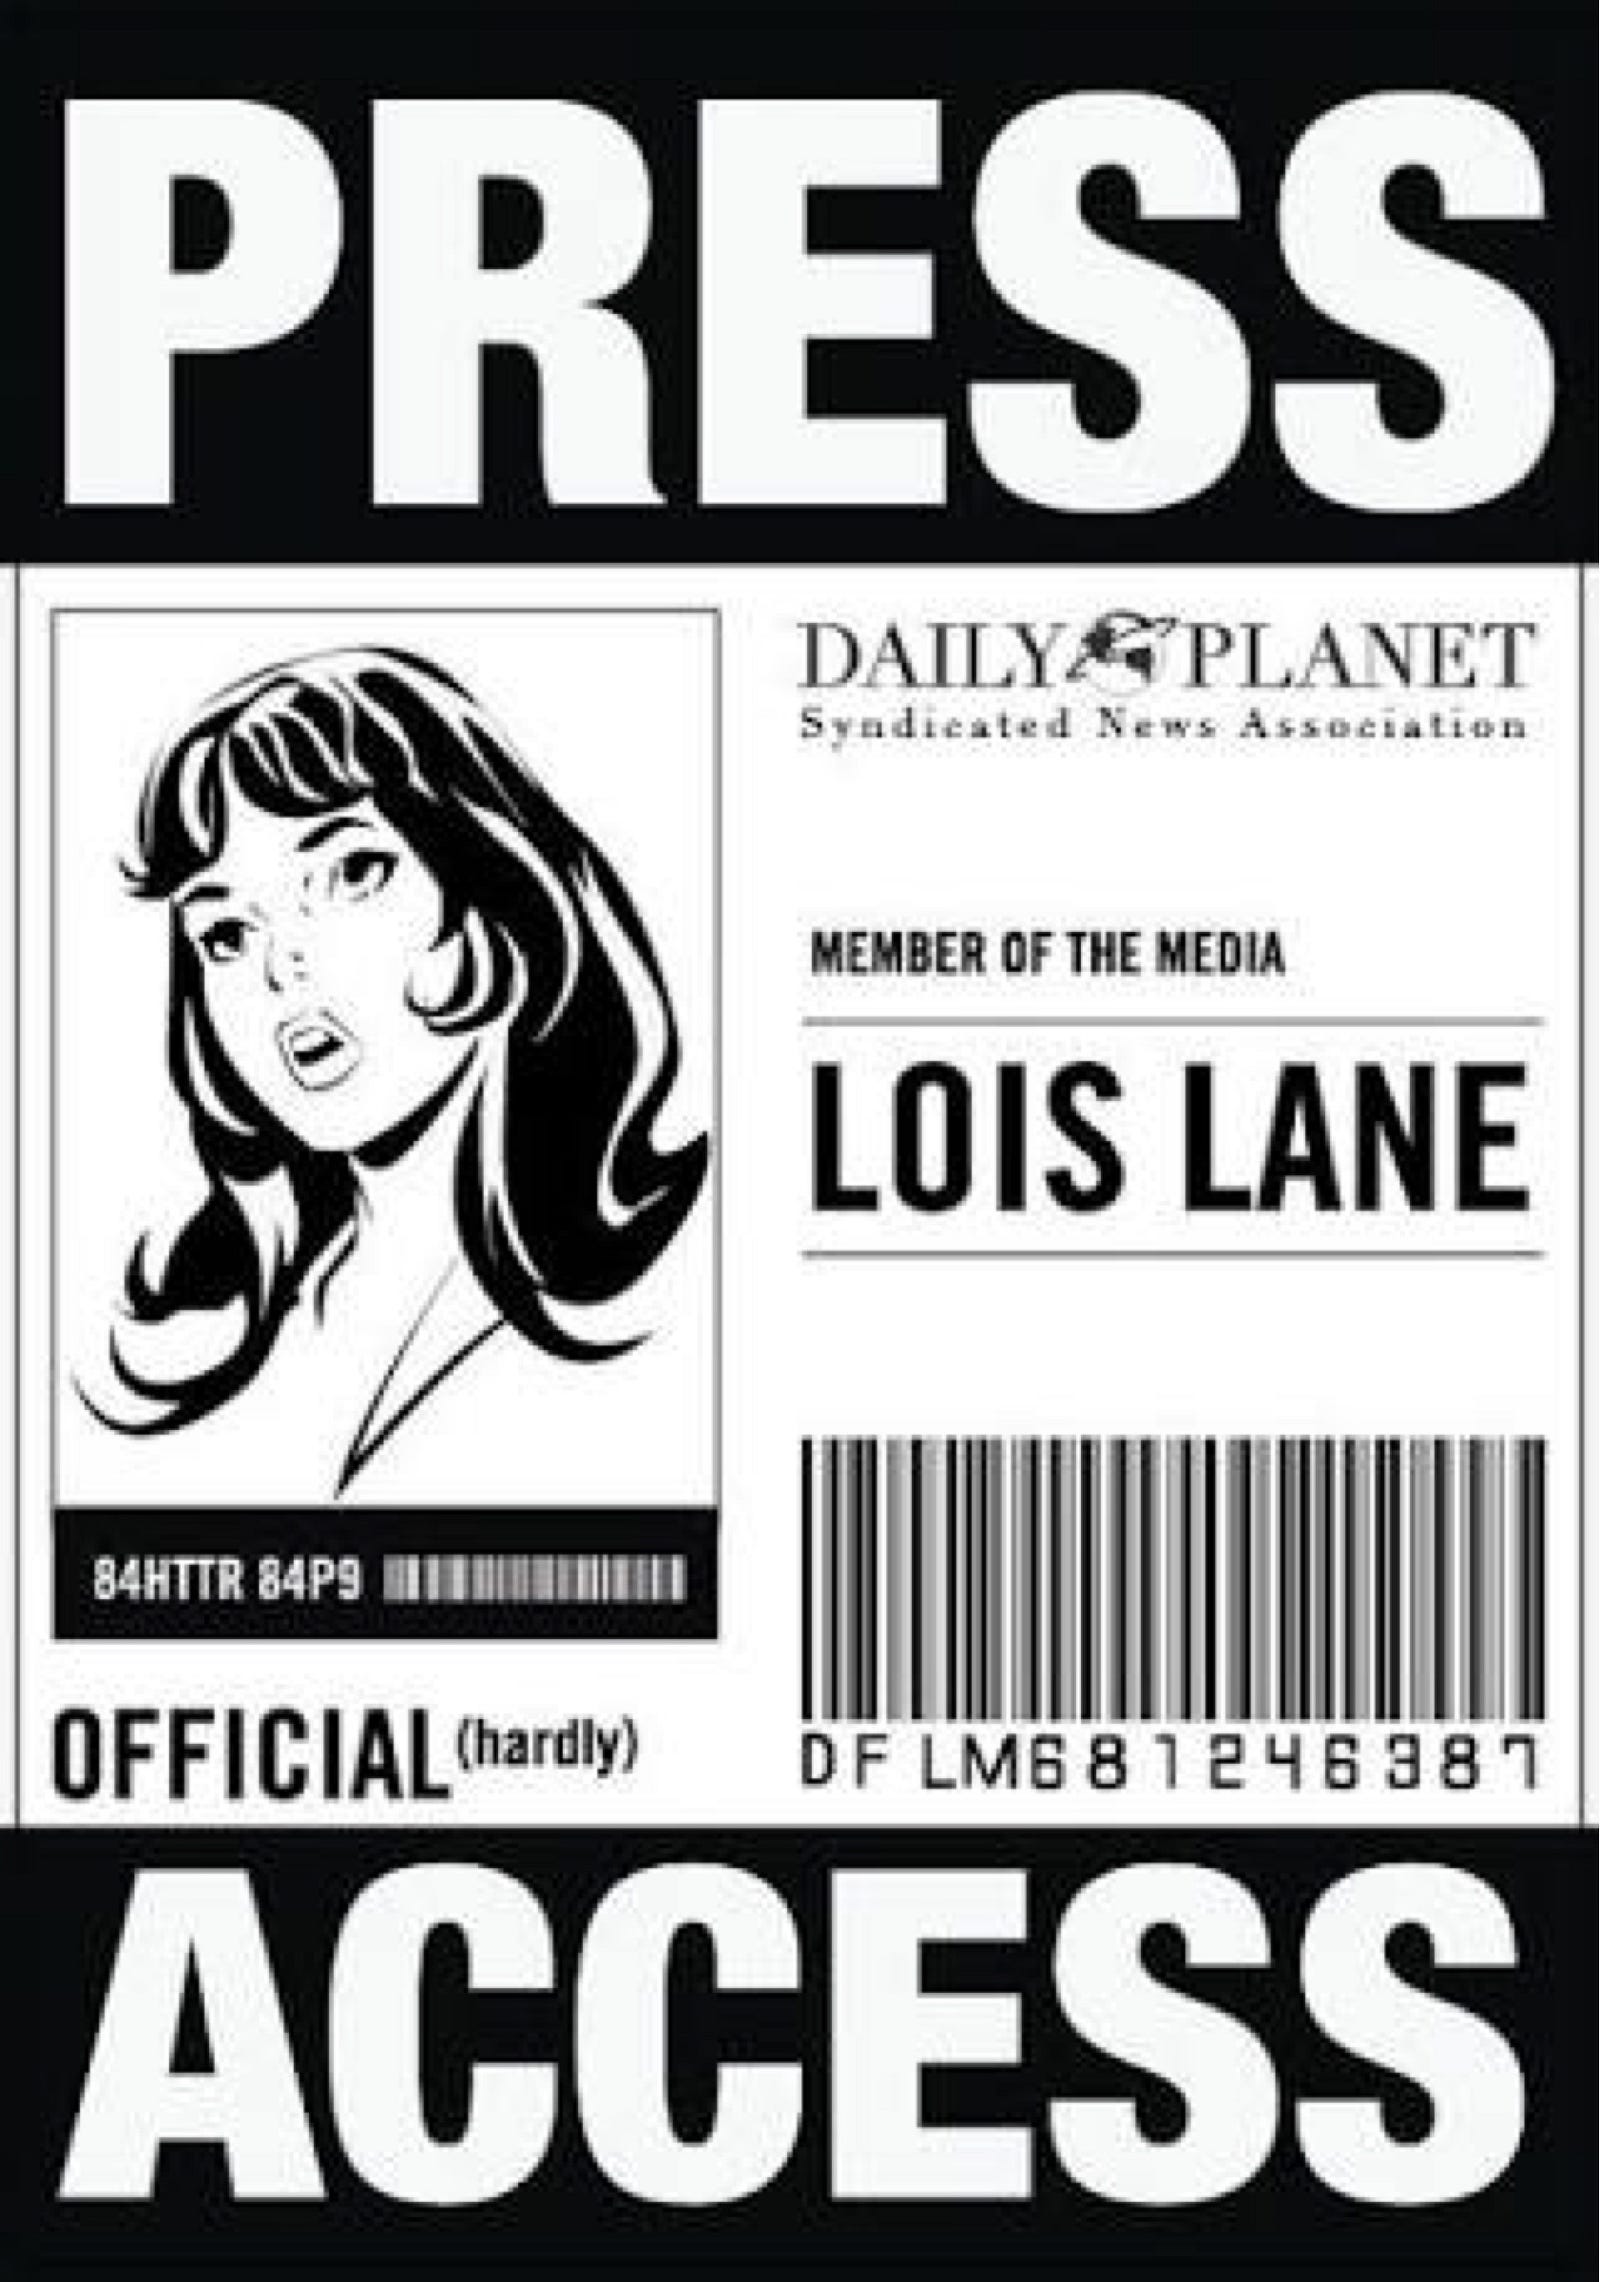 Lois Lane s Character Set A Few Unrealistic Standards For Female 